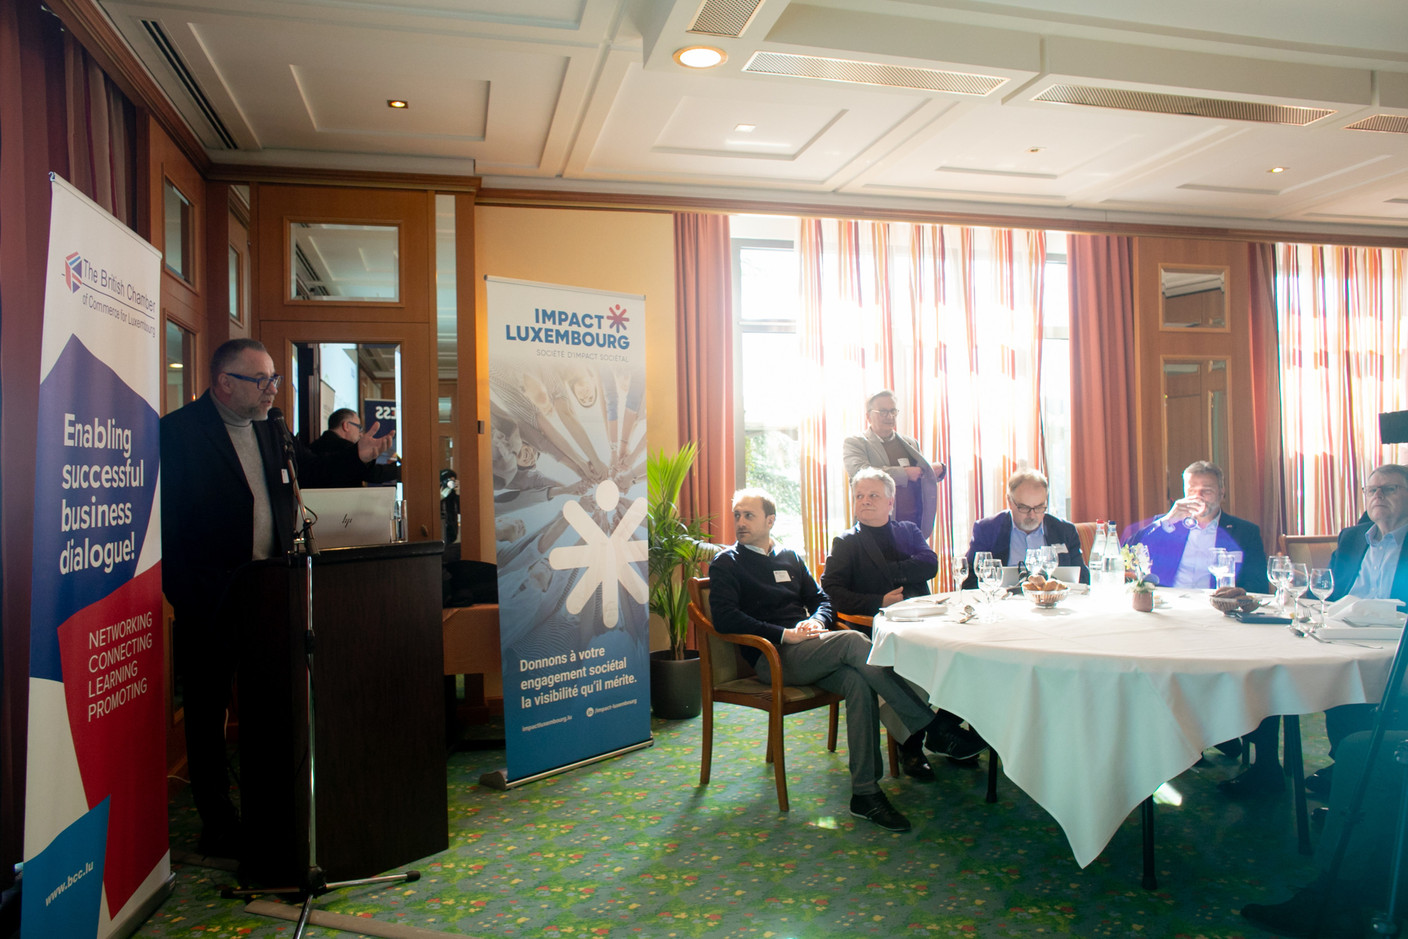 BCC Chairman Daniel Eischen gave the opening remarks at the Impact Luxembourg lunch event, hosted by the British Chamber of Commerce on 21 February 2023 at the Hotel Parc Belair. Photo: Matic Zorman / Maison Moderne